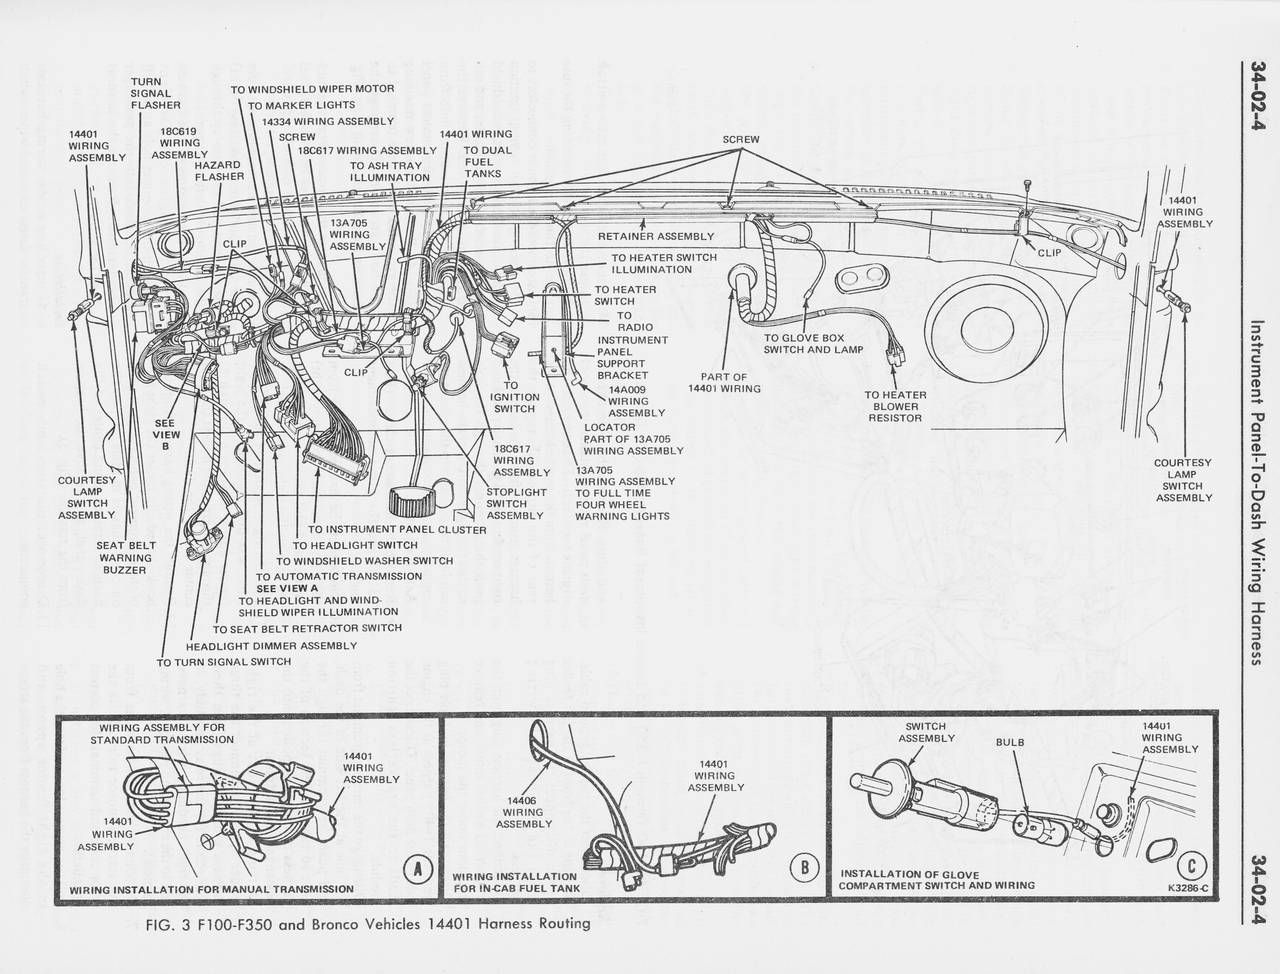 1978 Ford Shop Manual Vol 3&4 - Group 34 - Main Wiring Harness, Circuit